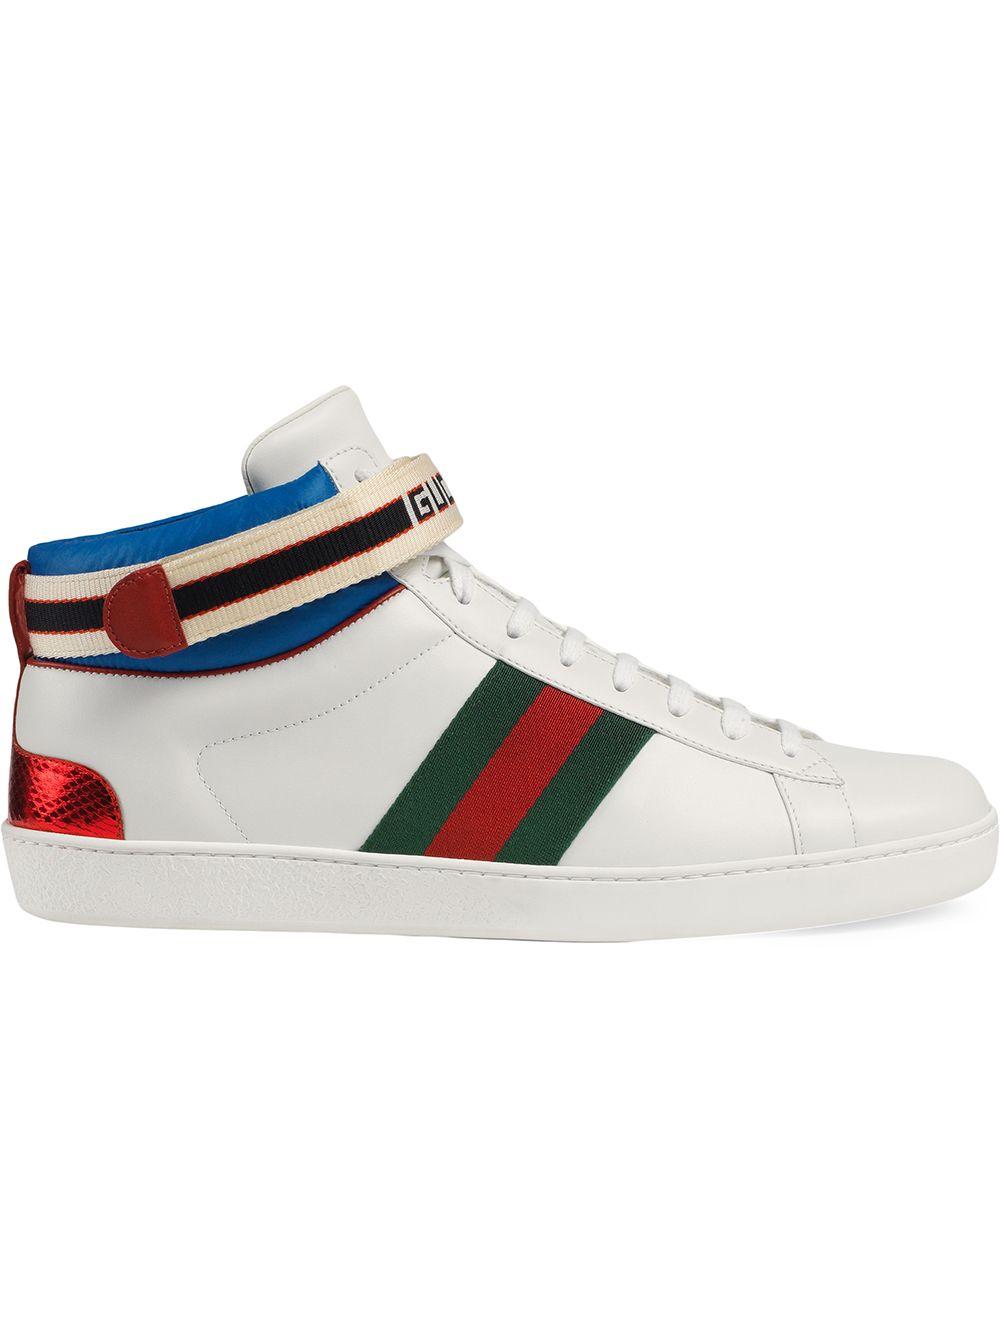 Gucci Ace Stripe High-top Sneaker in White for Men | Lyst